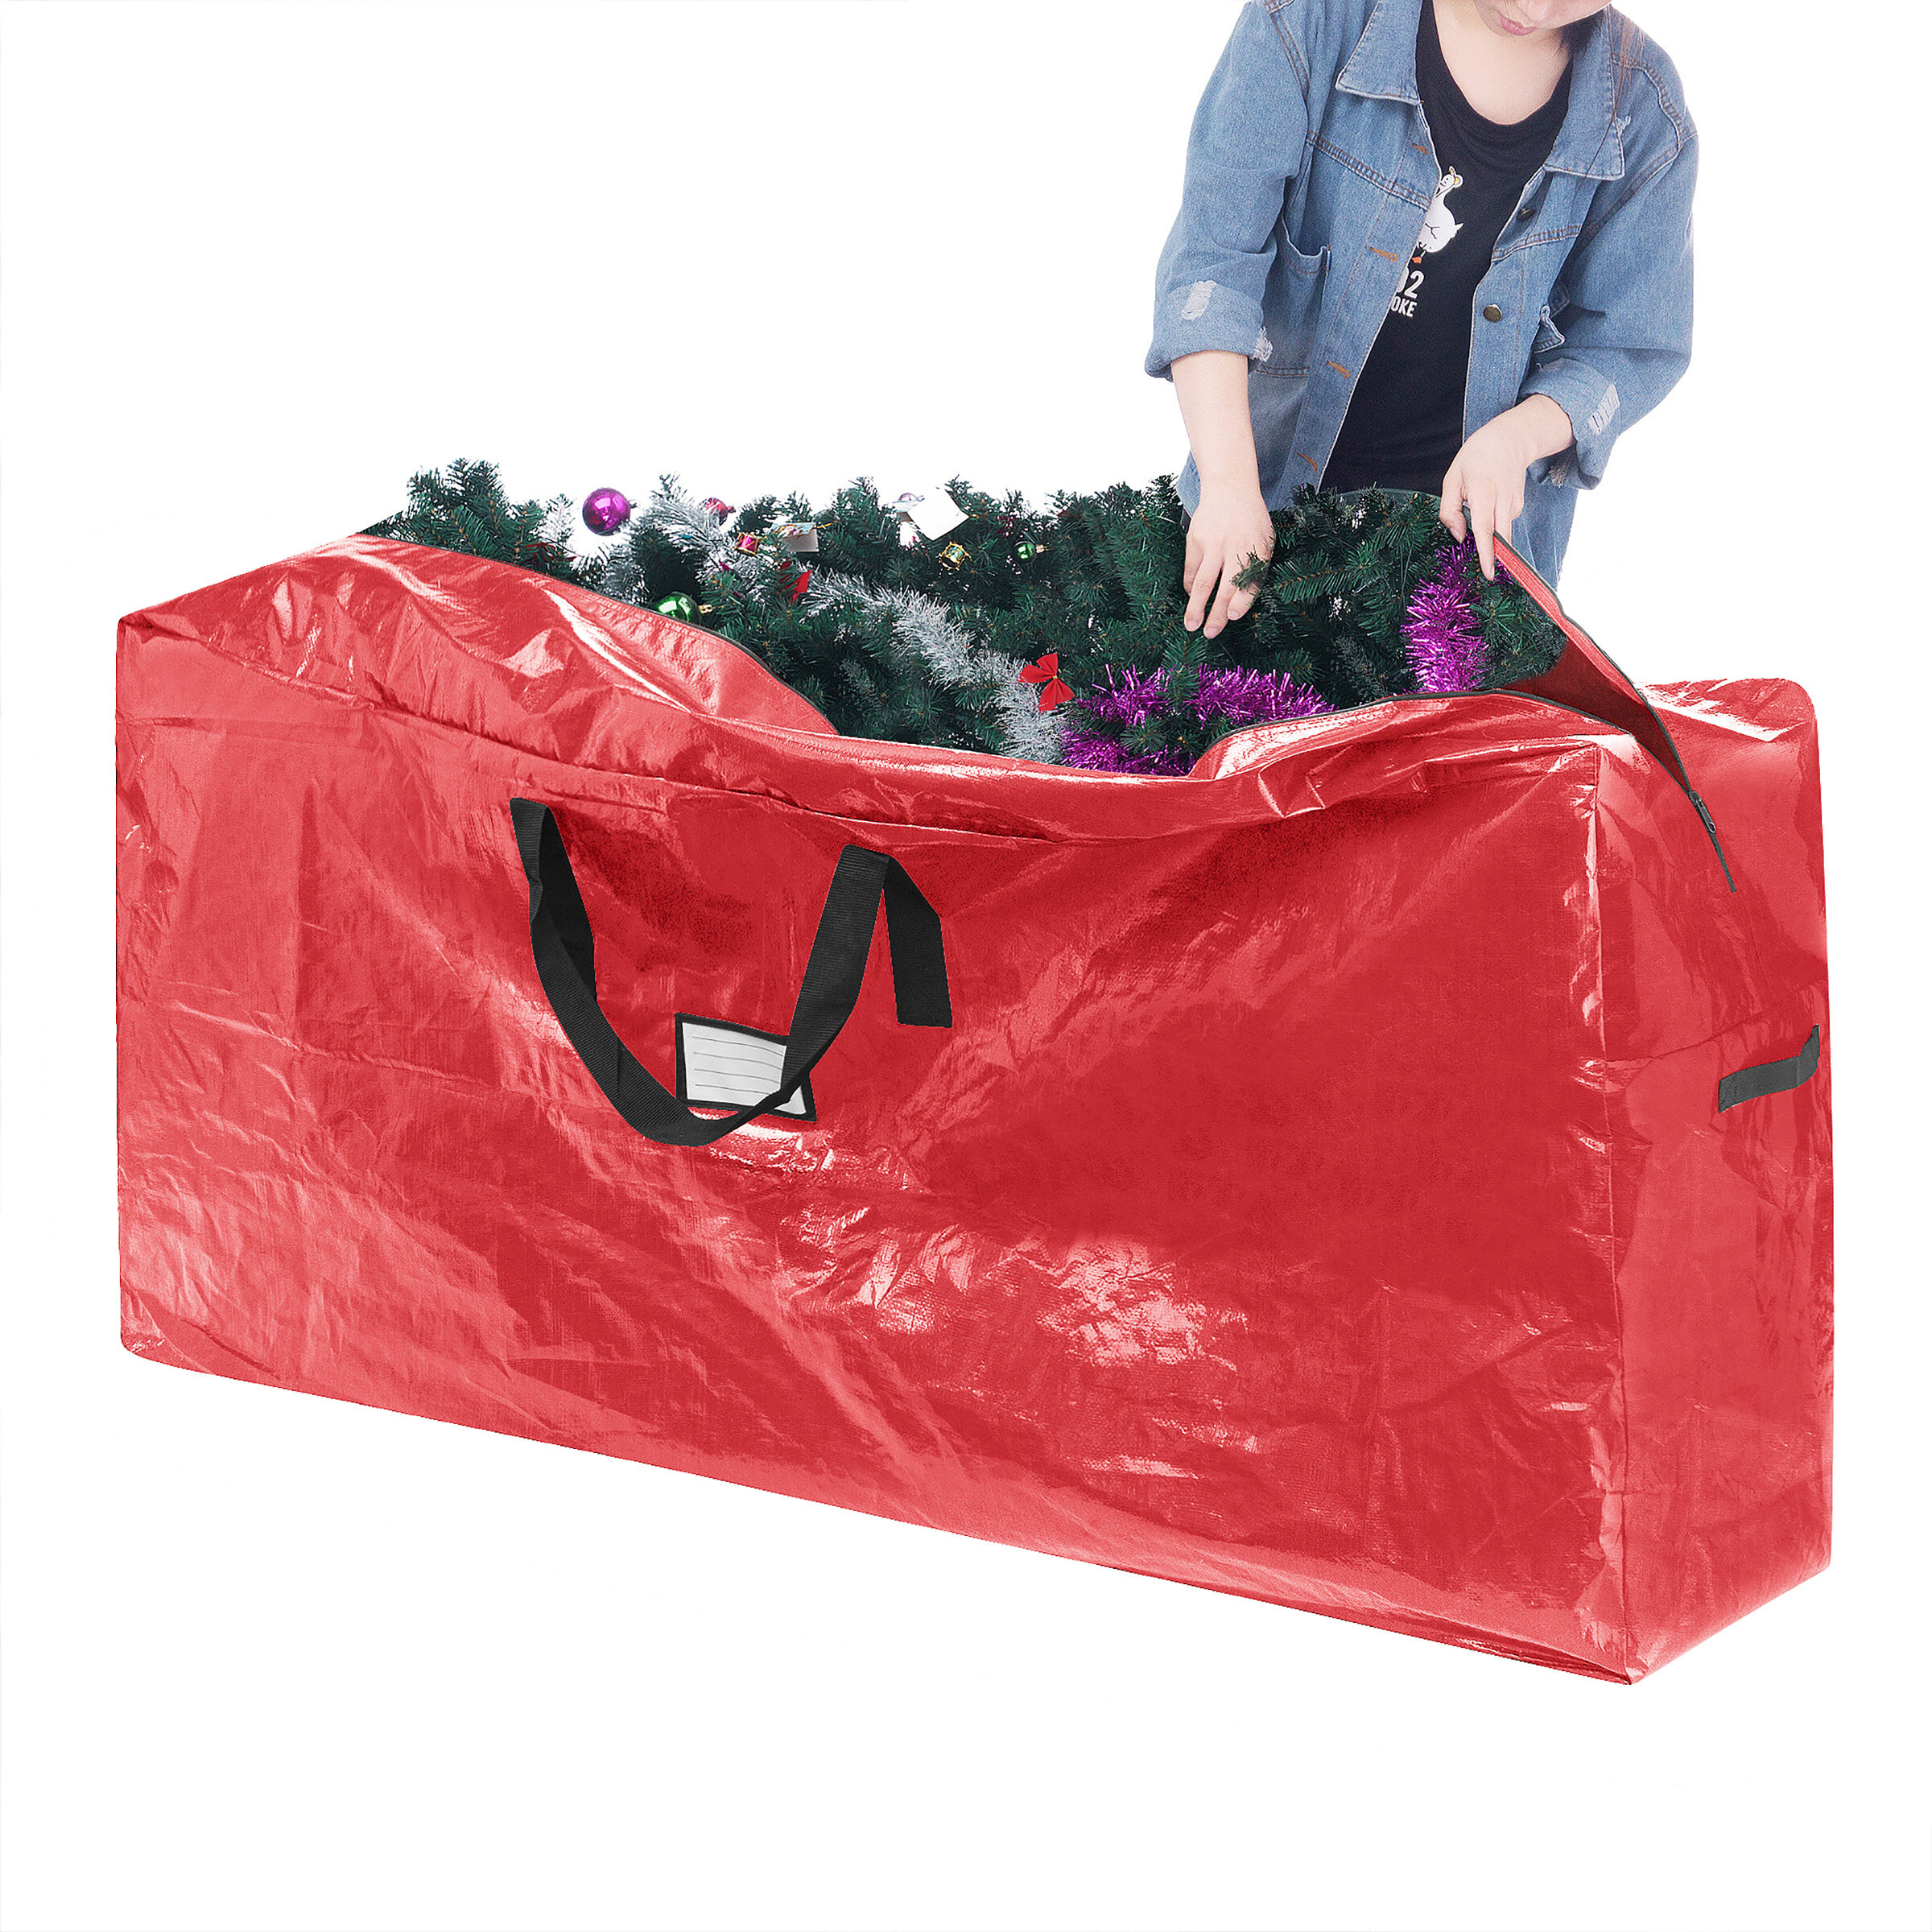 Deluxe Christmas Wreath Storage Bag Rebrilliant Color: Red, Size: 10 H x 48 W x 48 D